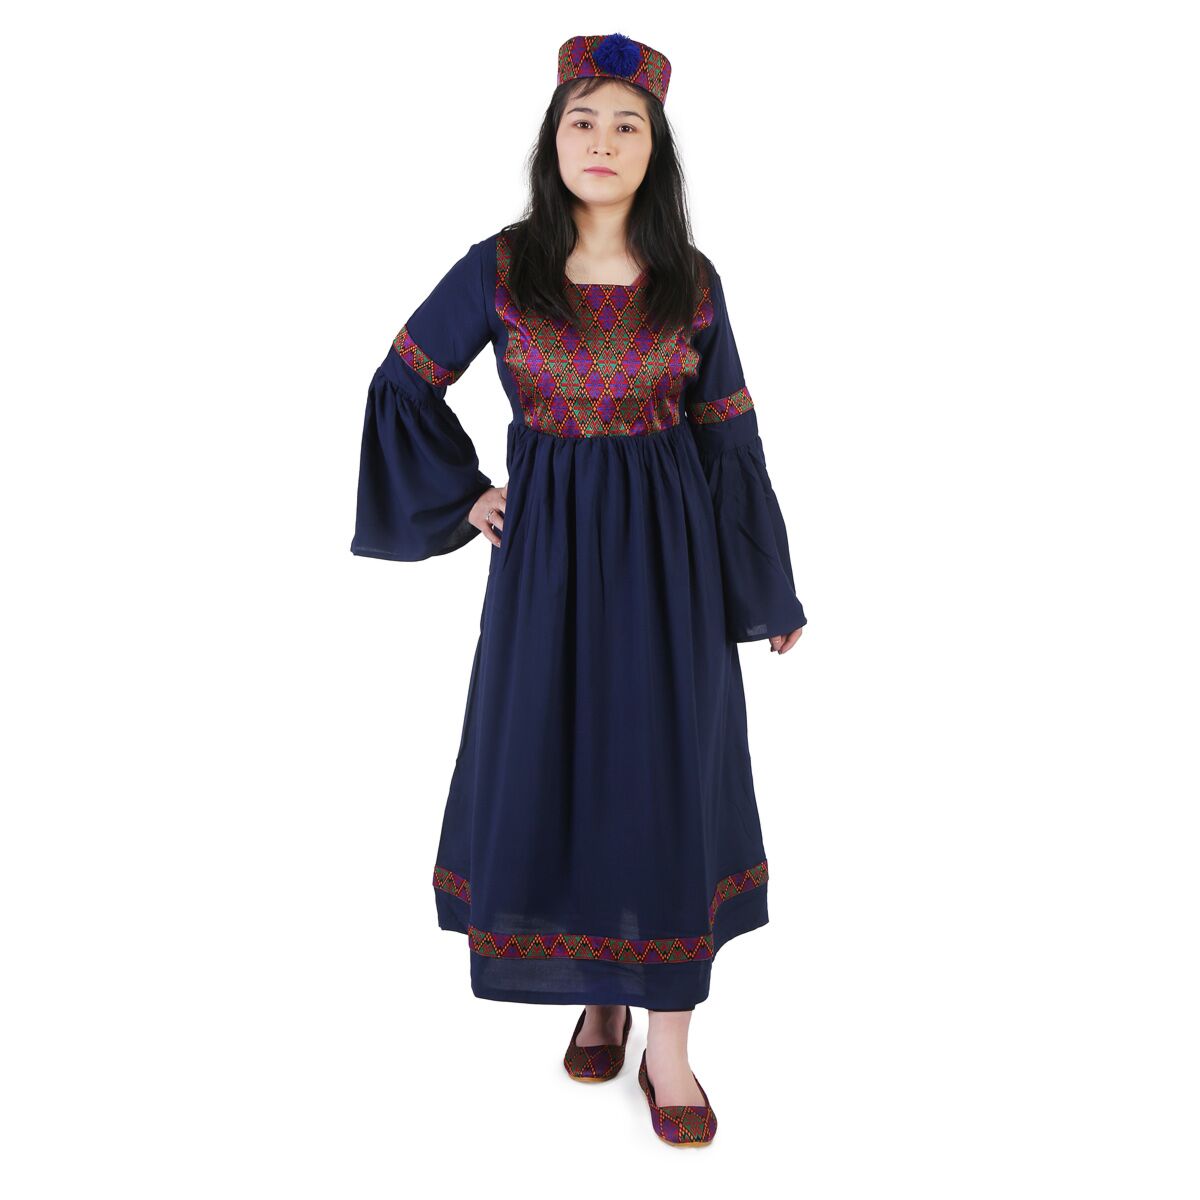 Colorful Hazaragi Embroidered Dress | Blue Cotton Frock With Embroidered Hat